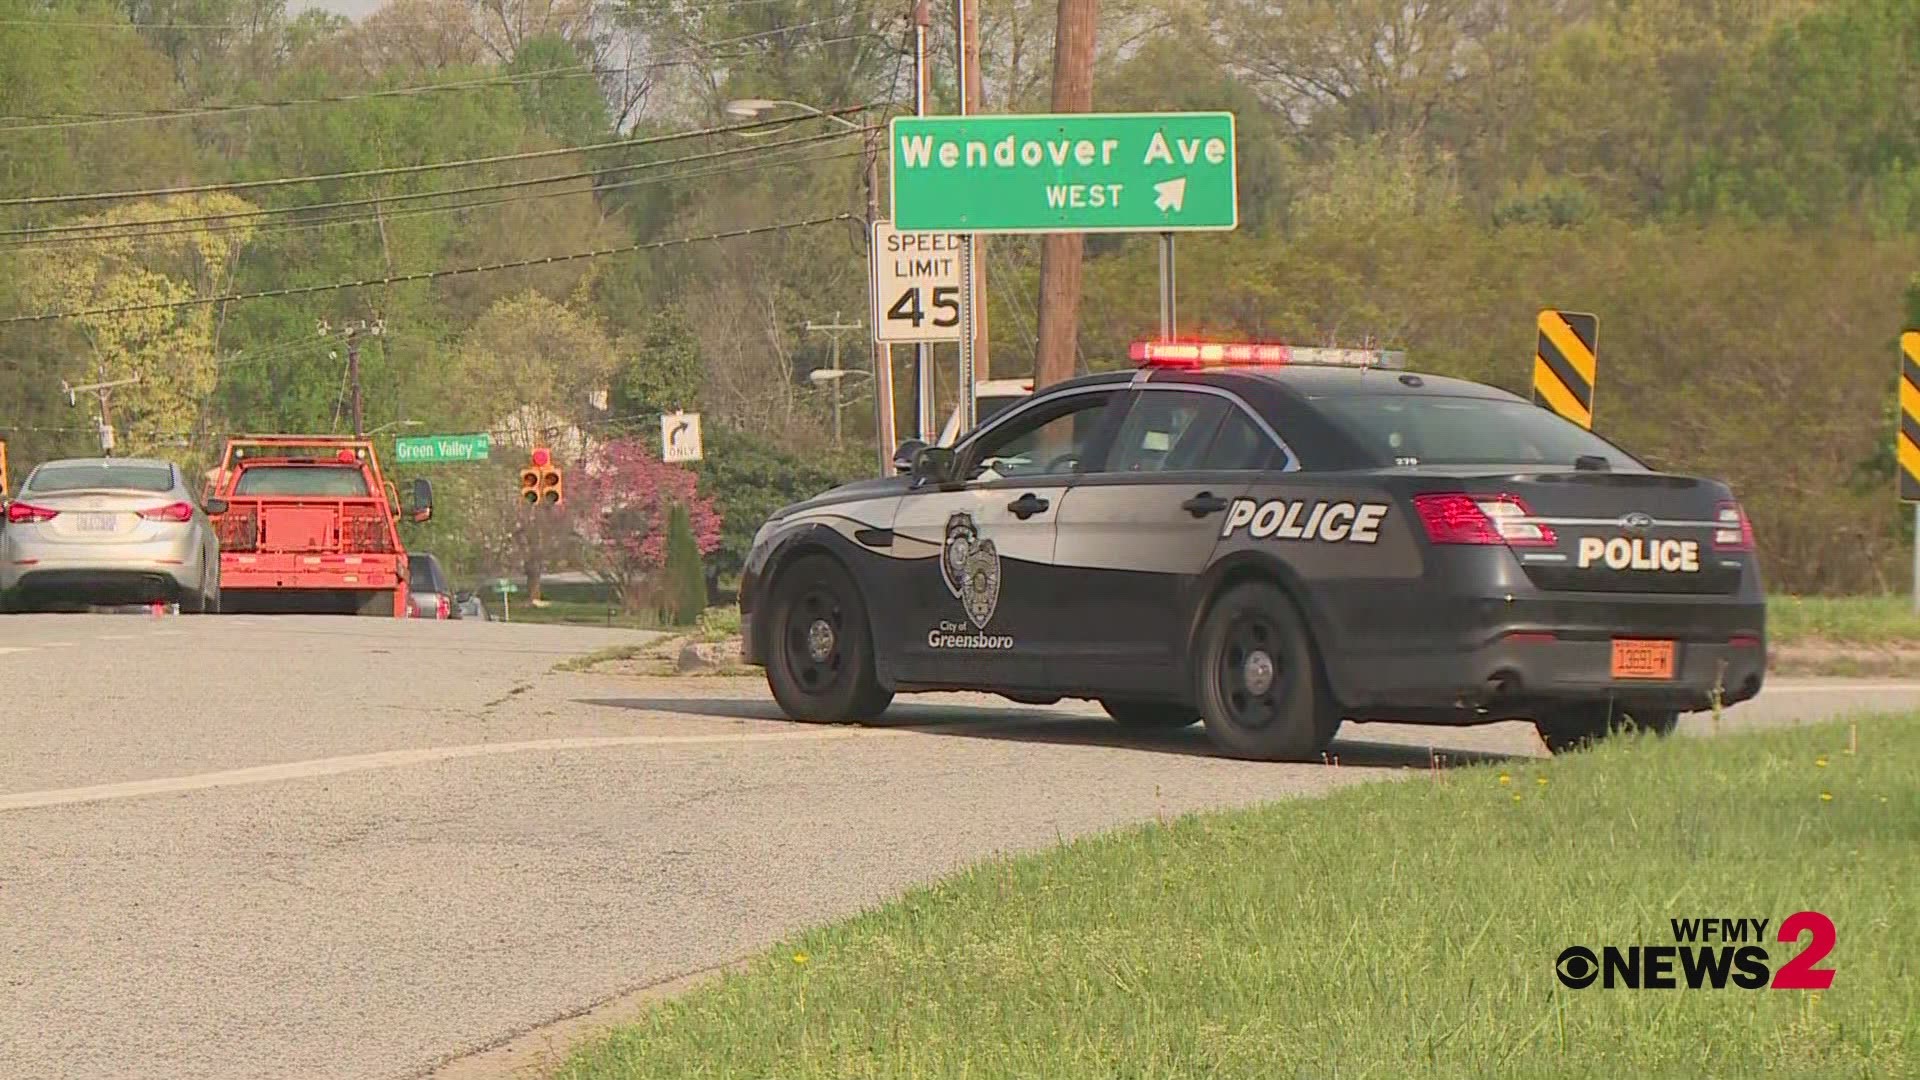 West Wendover Avenue is closed between Westover Terrace and Benjamin Parkway in Greensboro after a crash.